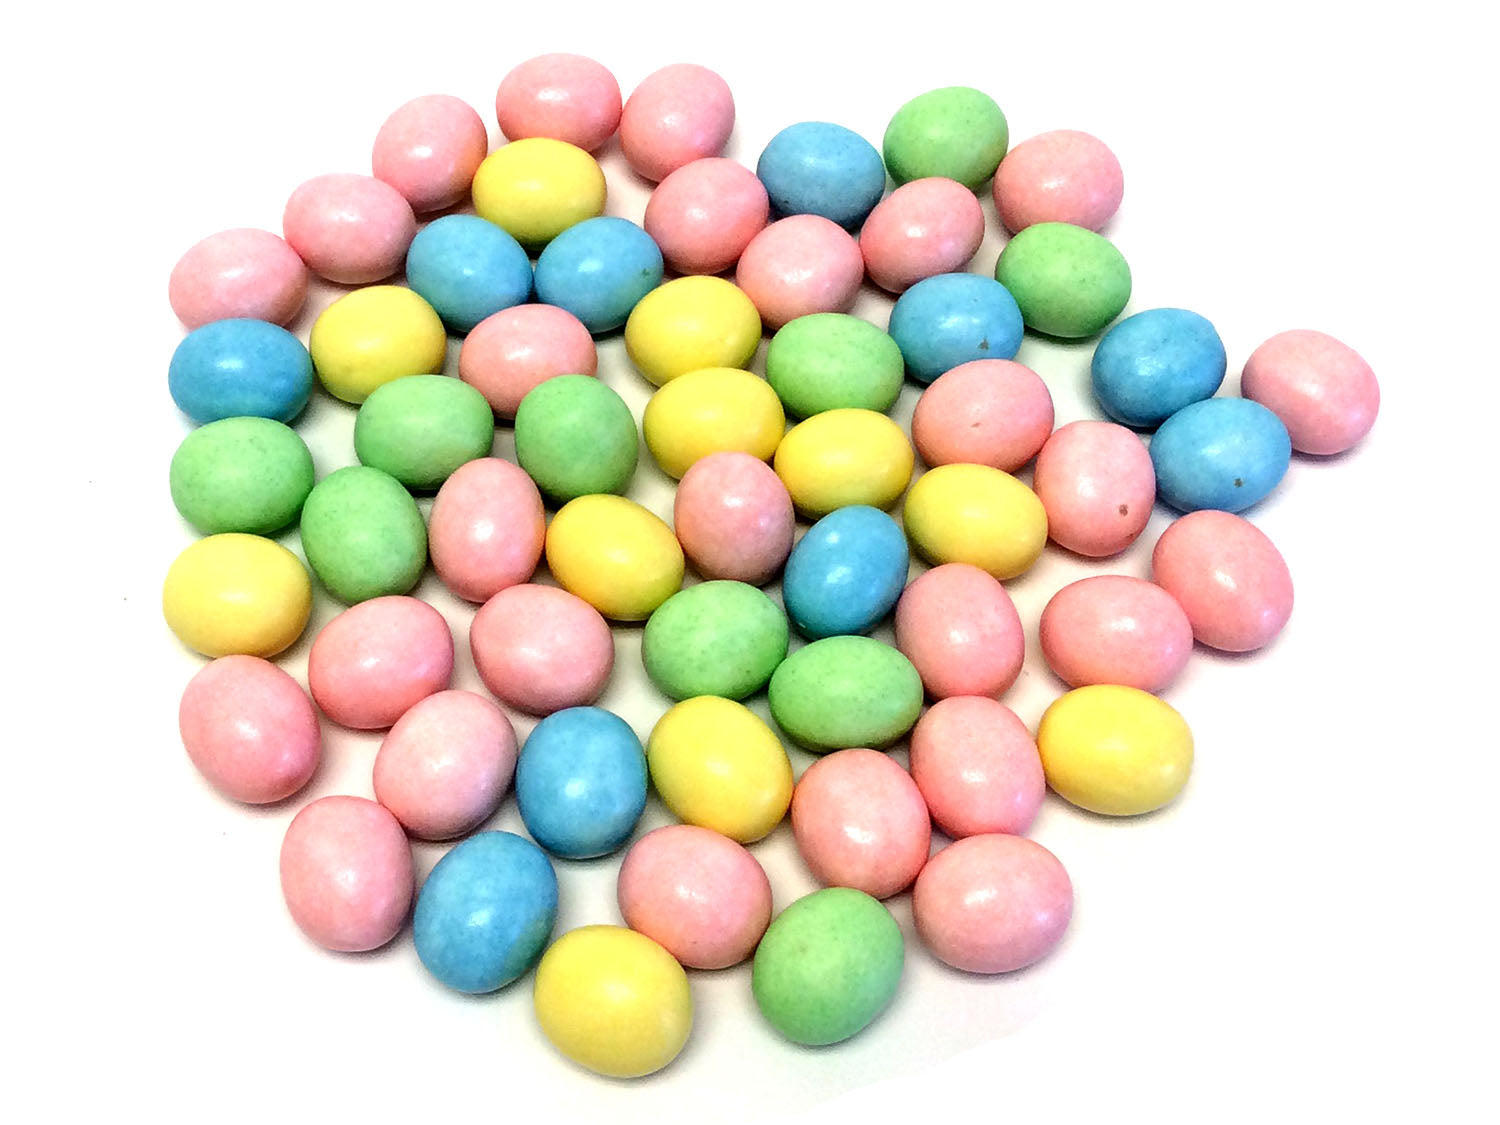 Hershey's Candy Coated Eggs 